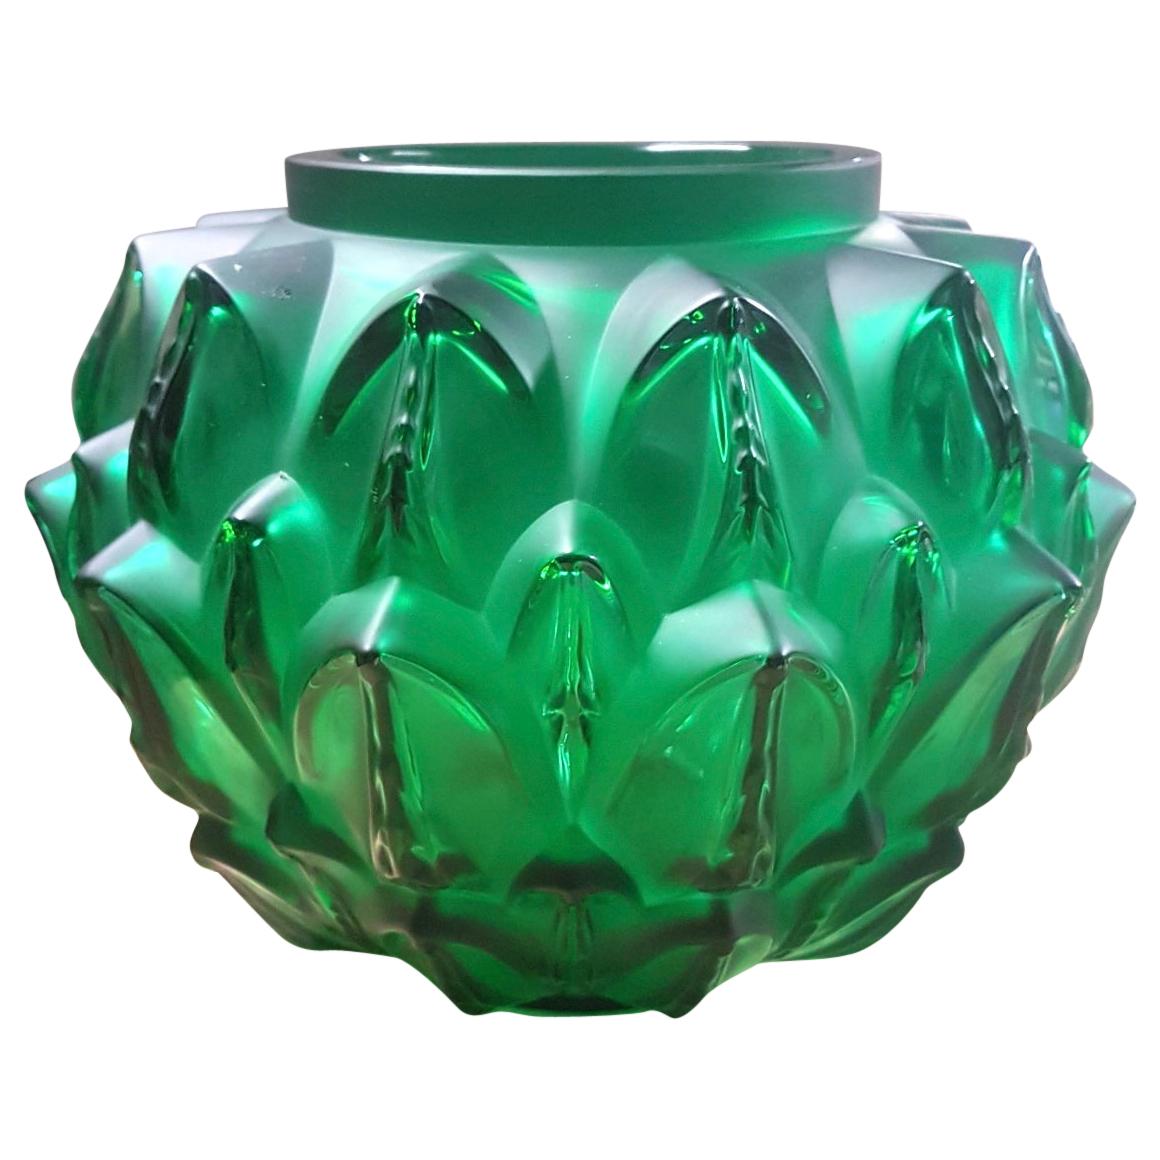 Lalique France Cynara Vase in Emerald Green Crystal as New in Box, Leaves